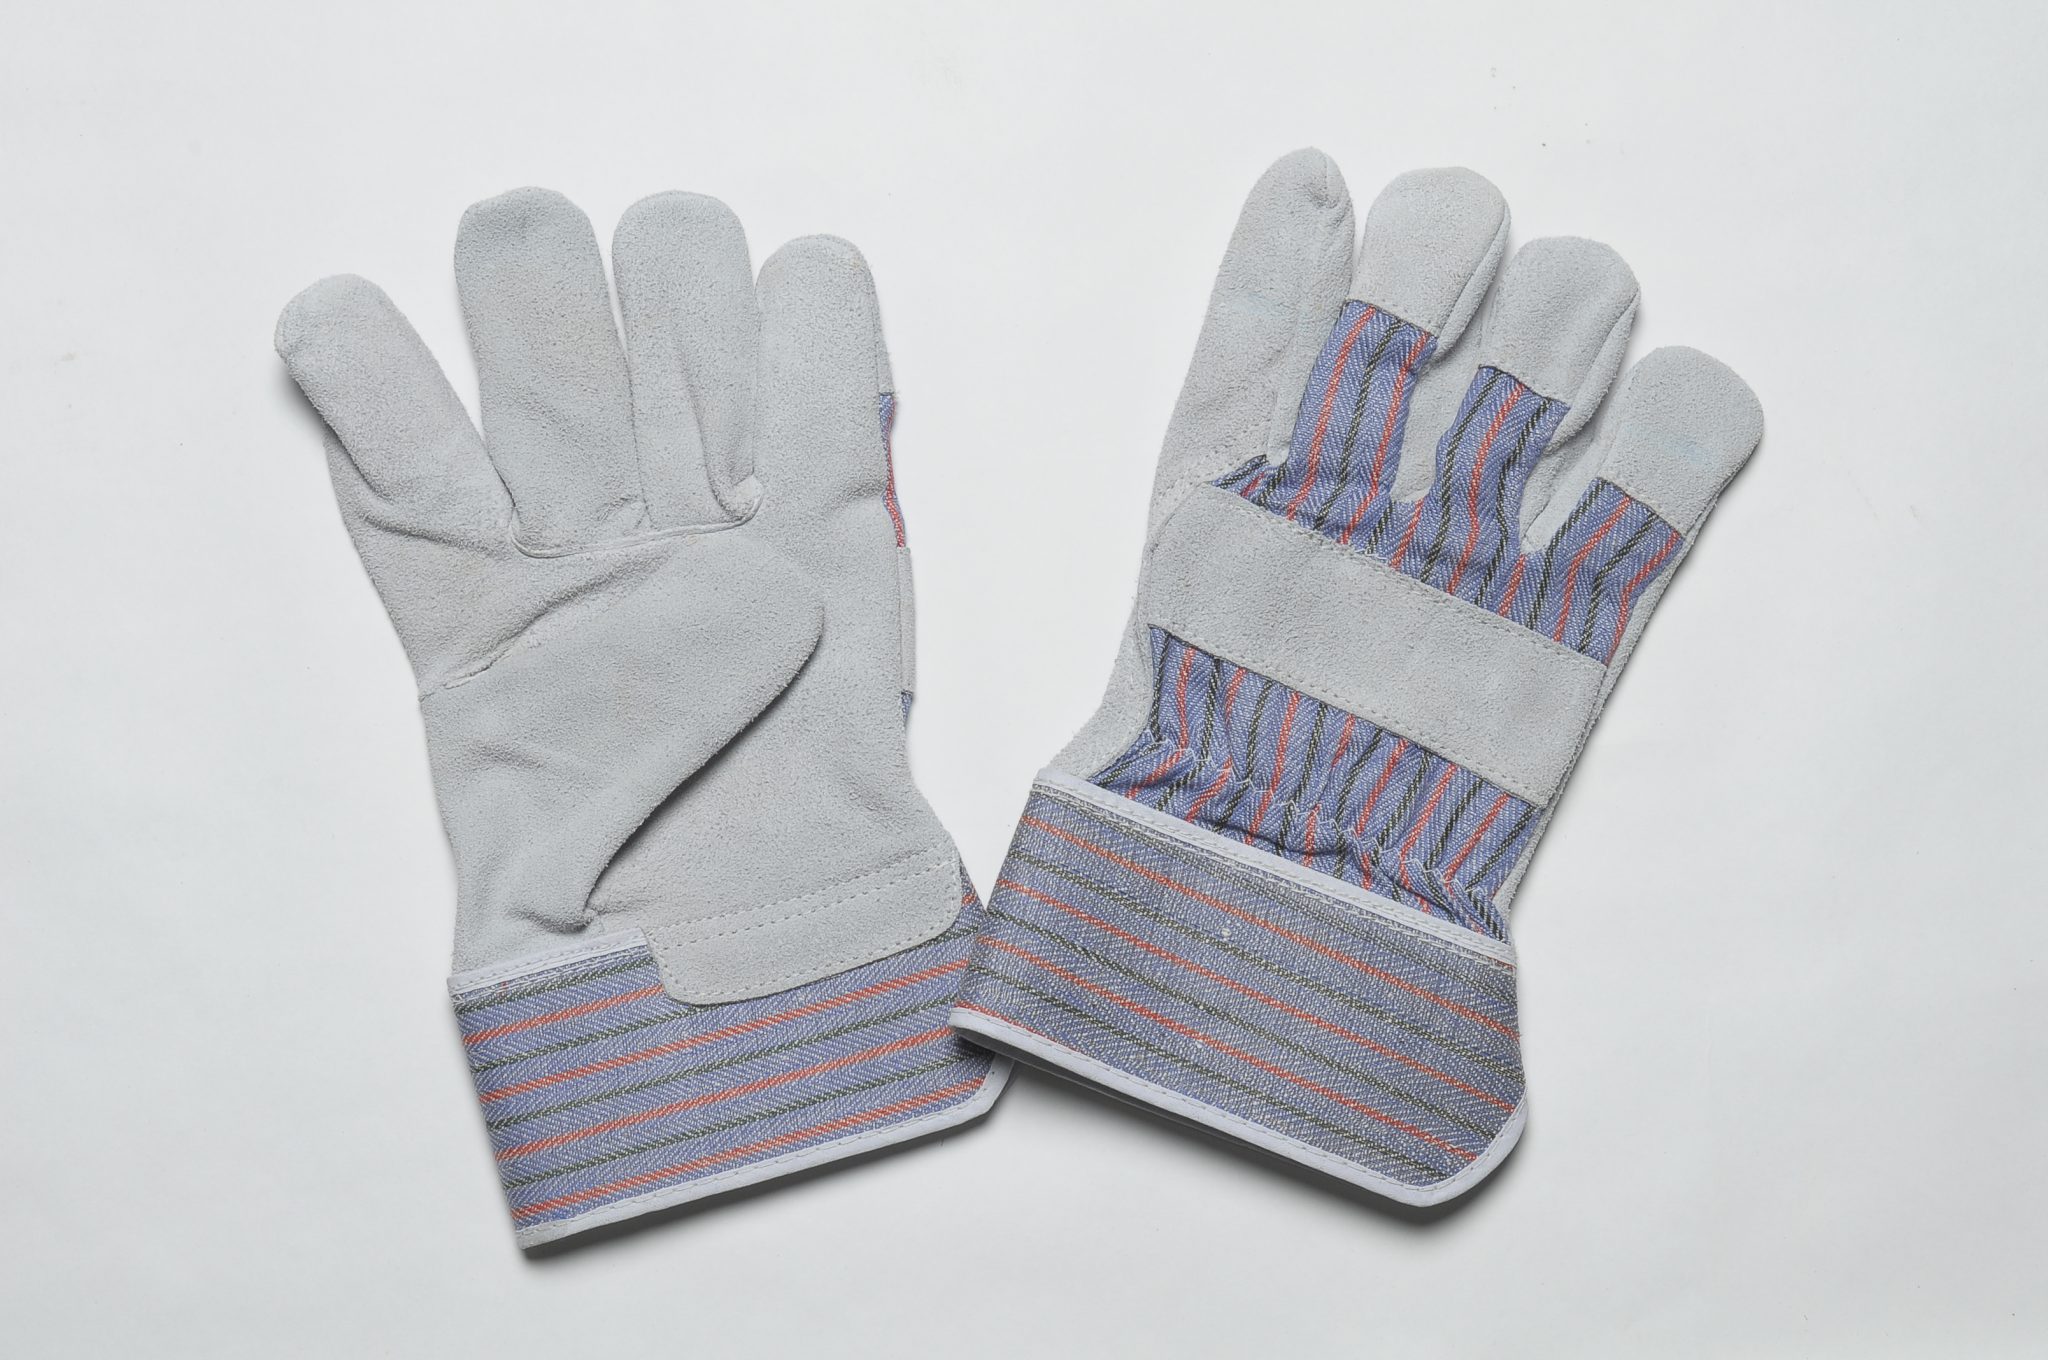 NATURAL CHEAP SPLIT GLOVES, ADJUSTIBLE ELASTIC IN THE WRIST